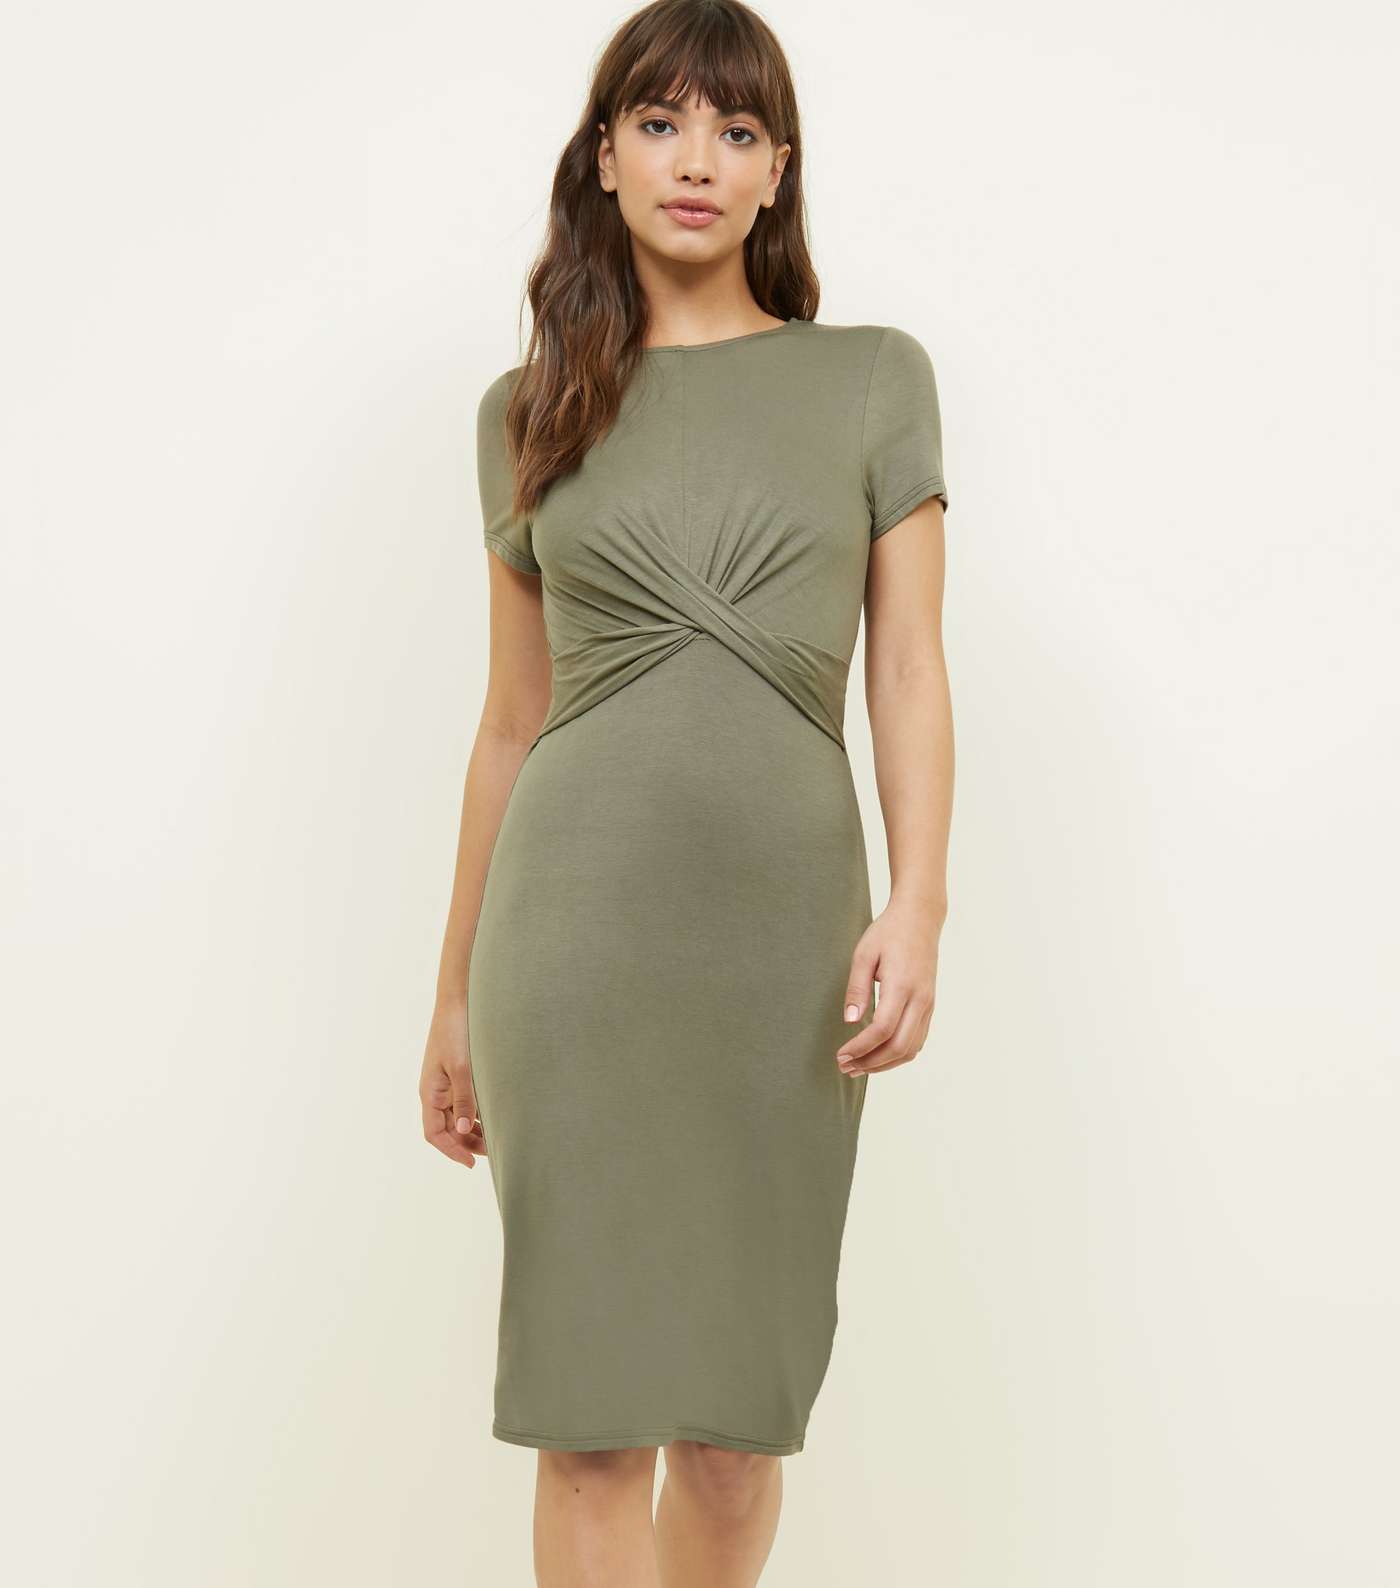 Olive Green Twist Front Jersey Bodycon Dress